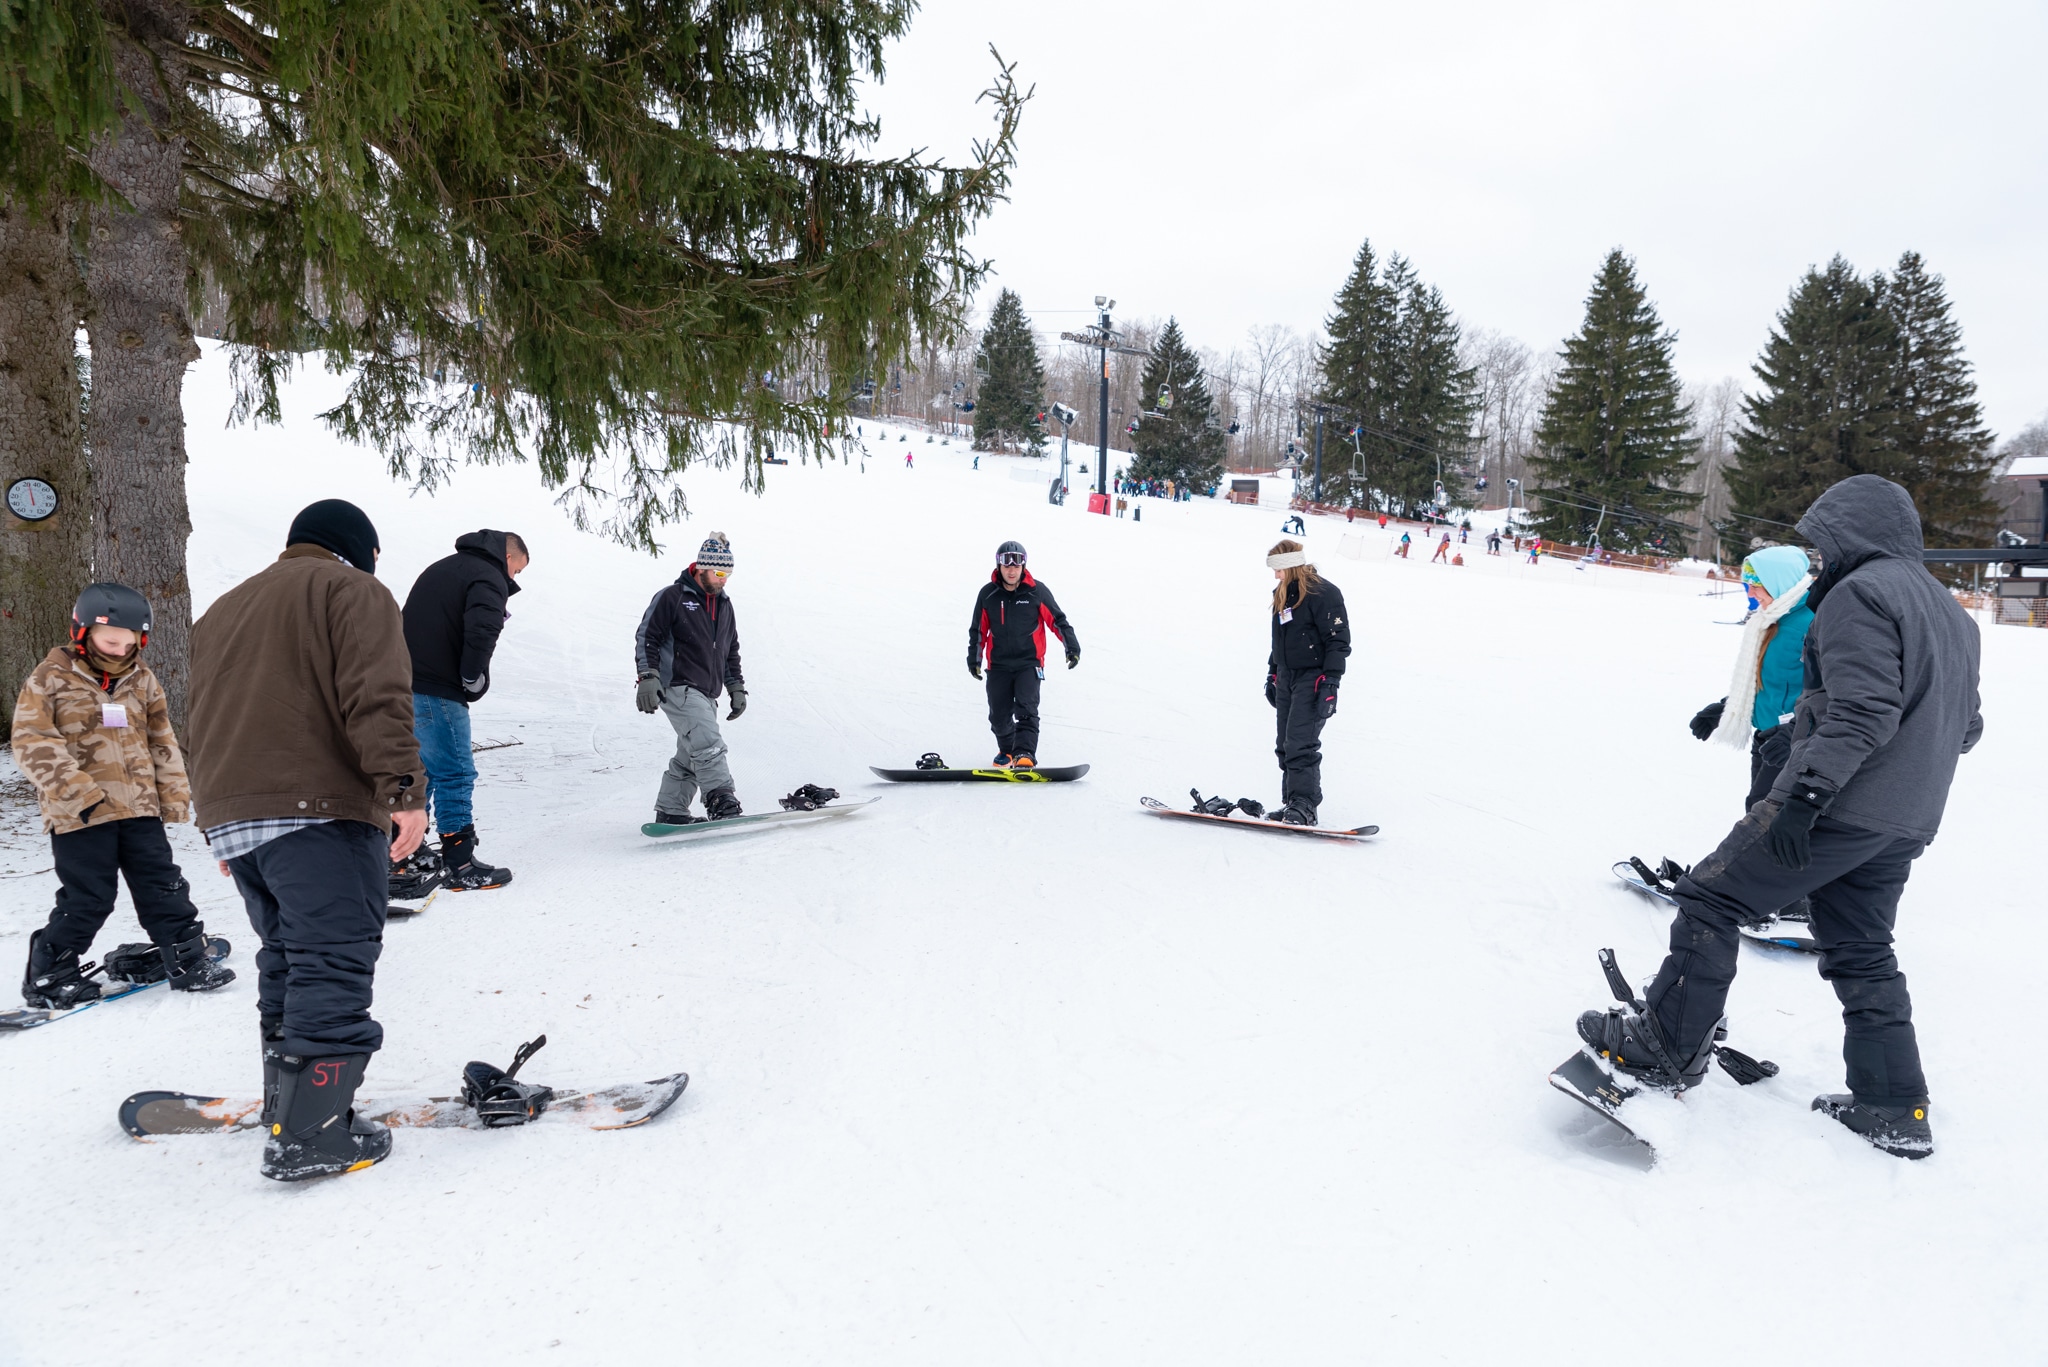 7 people standing on snowboards in a semi circle at snow trails, learning to snow board